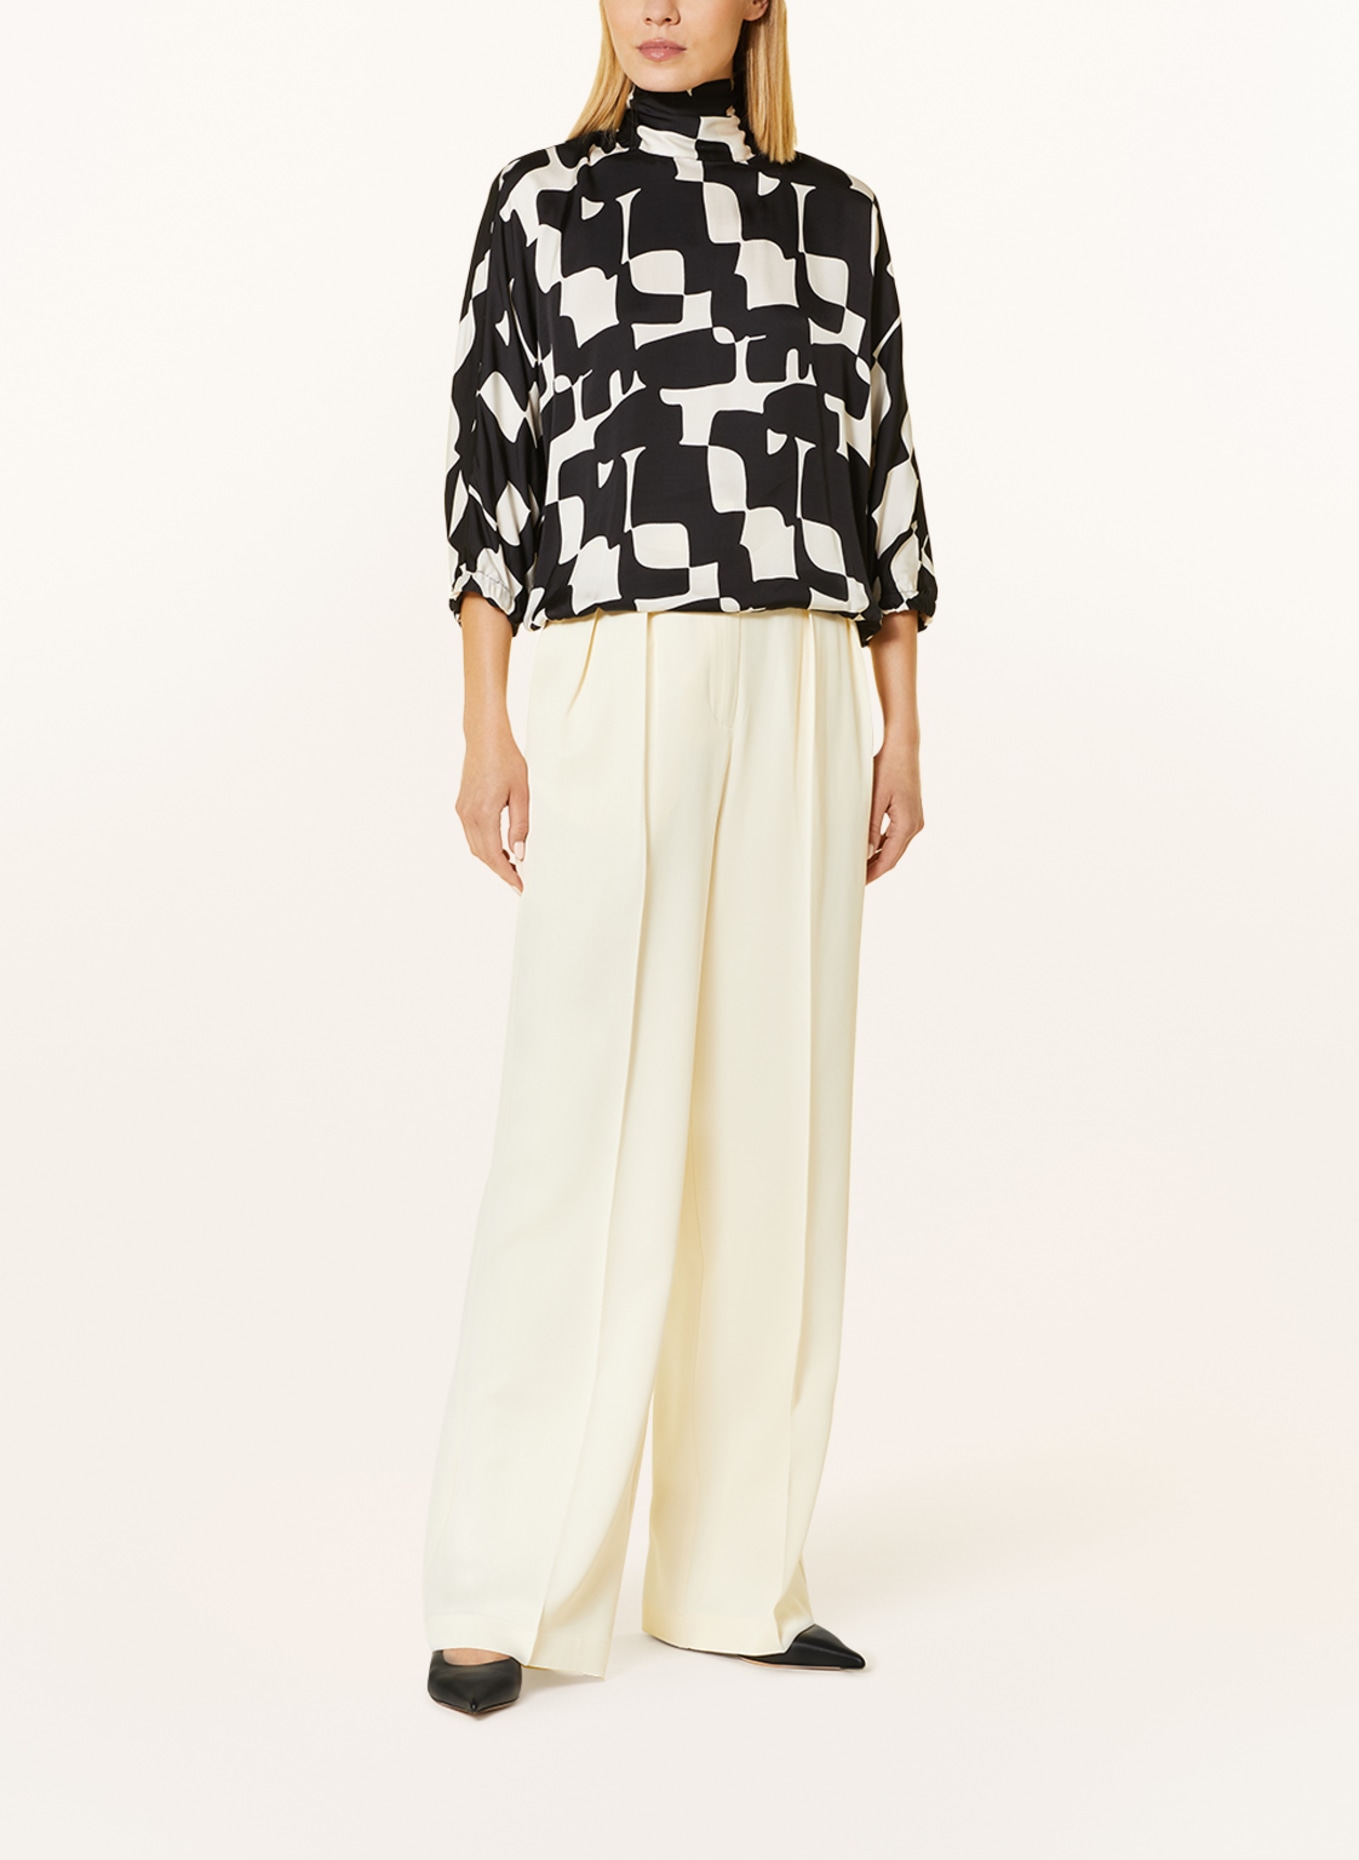 TONNO & PANNA Bow-tie blouse in satin with 3/4 sleeves, Color: BLACK/ WHITE (Image 2)